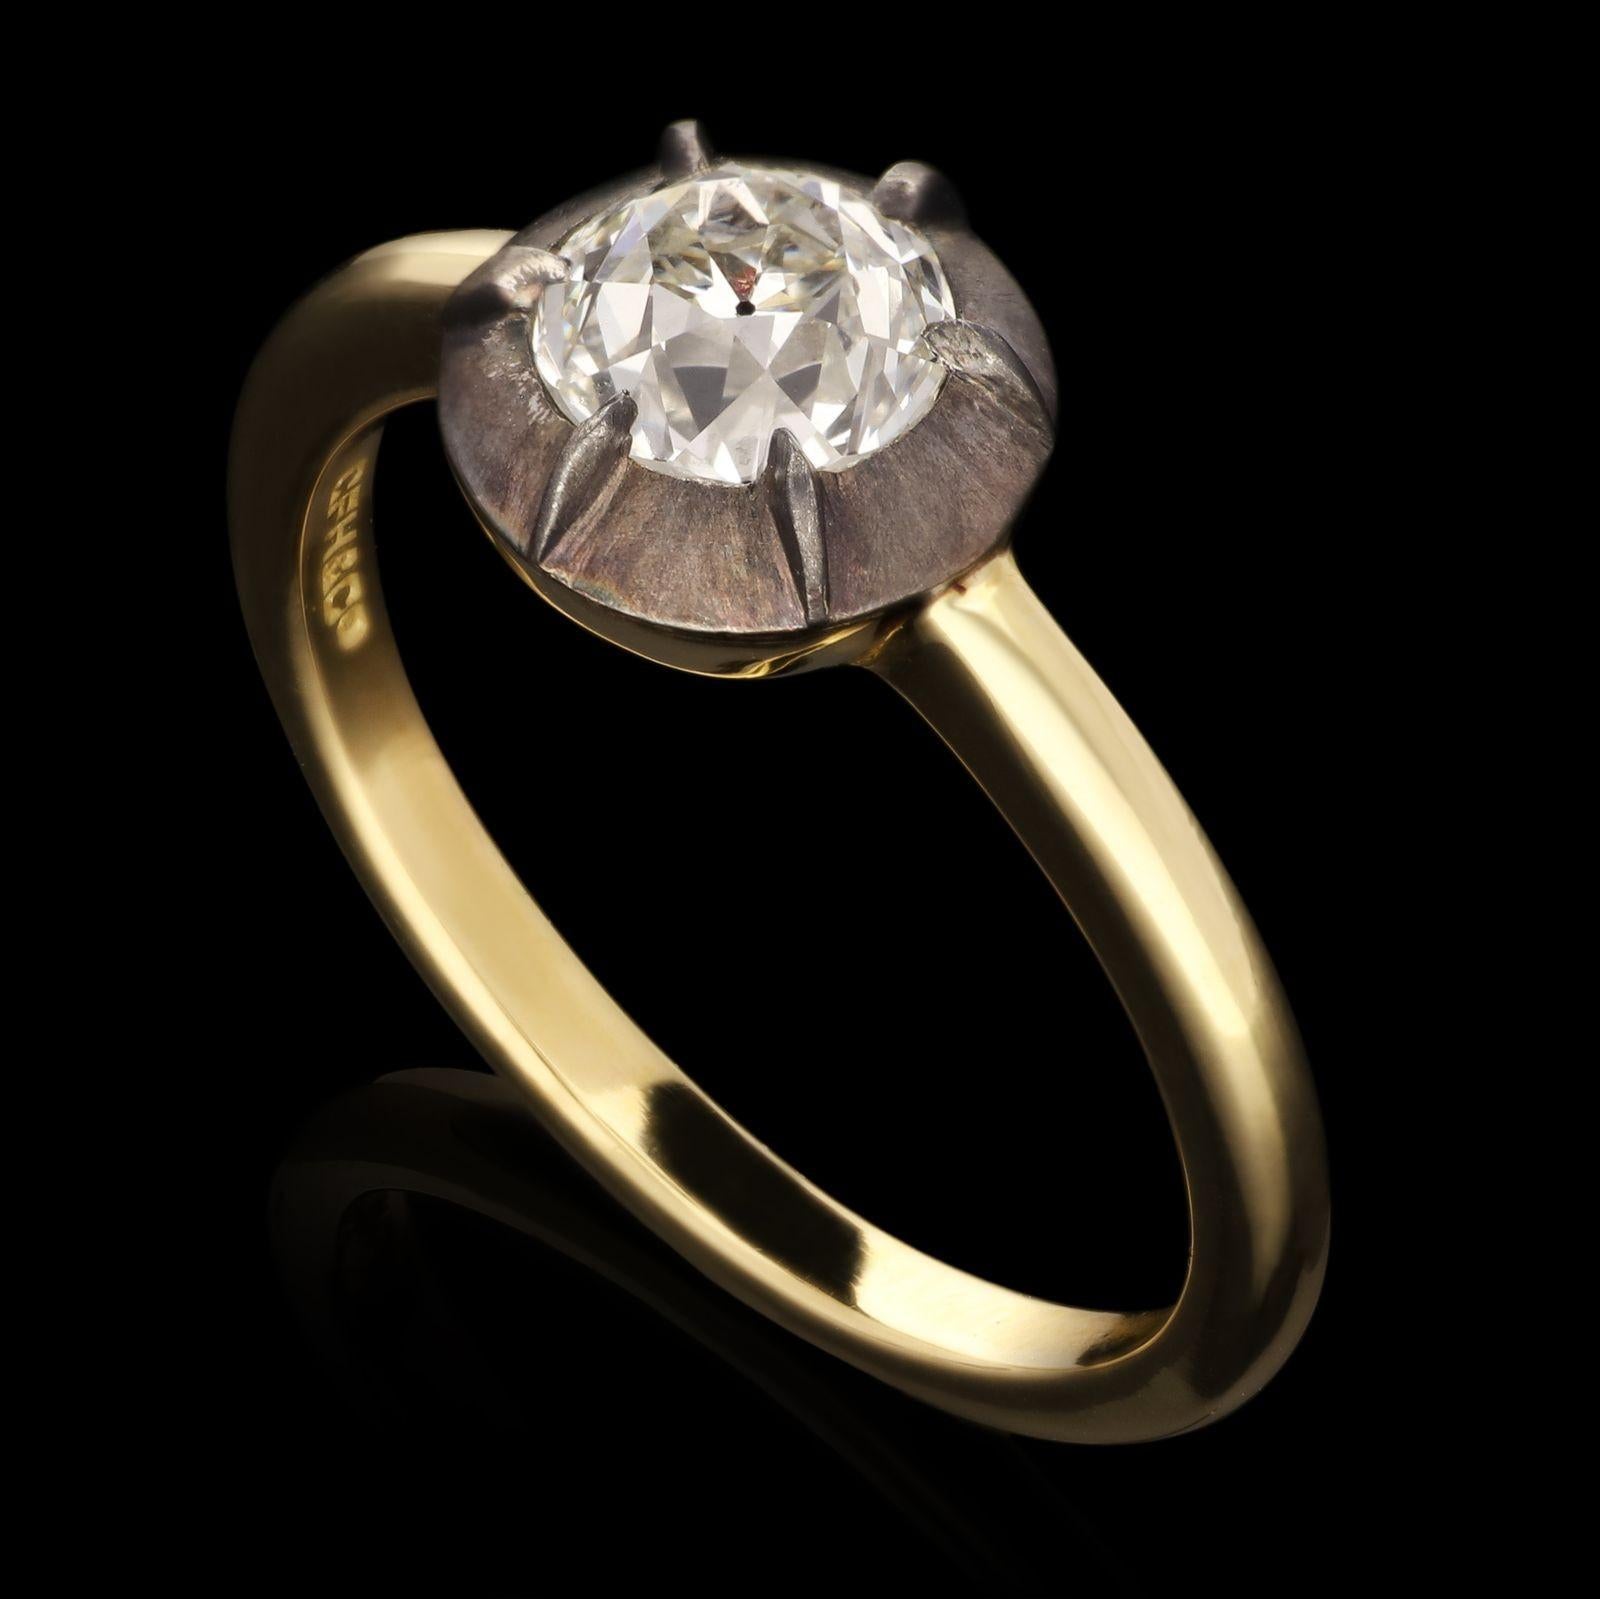 A beautiful old cut diamond ring in antique style setting by Hancocks, centred with a bright and lively old European brilliant cut diamond weighing 1.01cts and of G colour and VVS2 clarity in antique style handmade cut-down collet setting of black